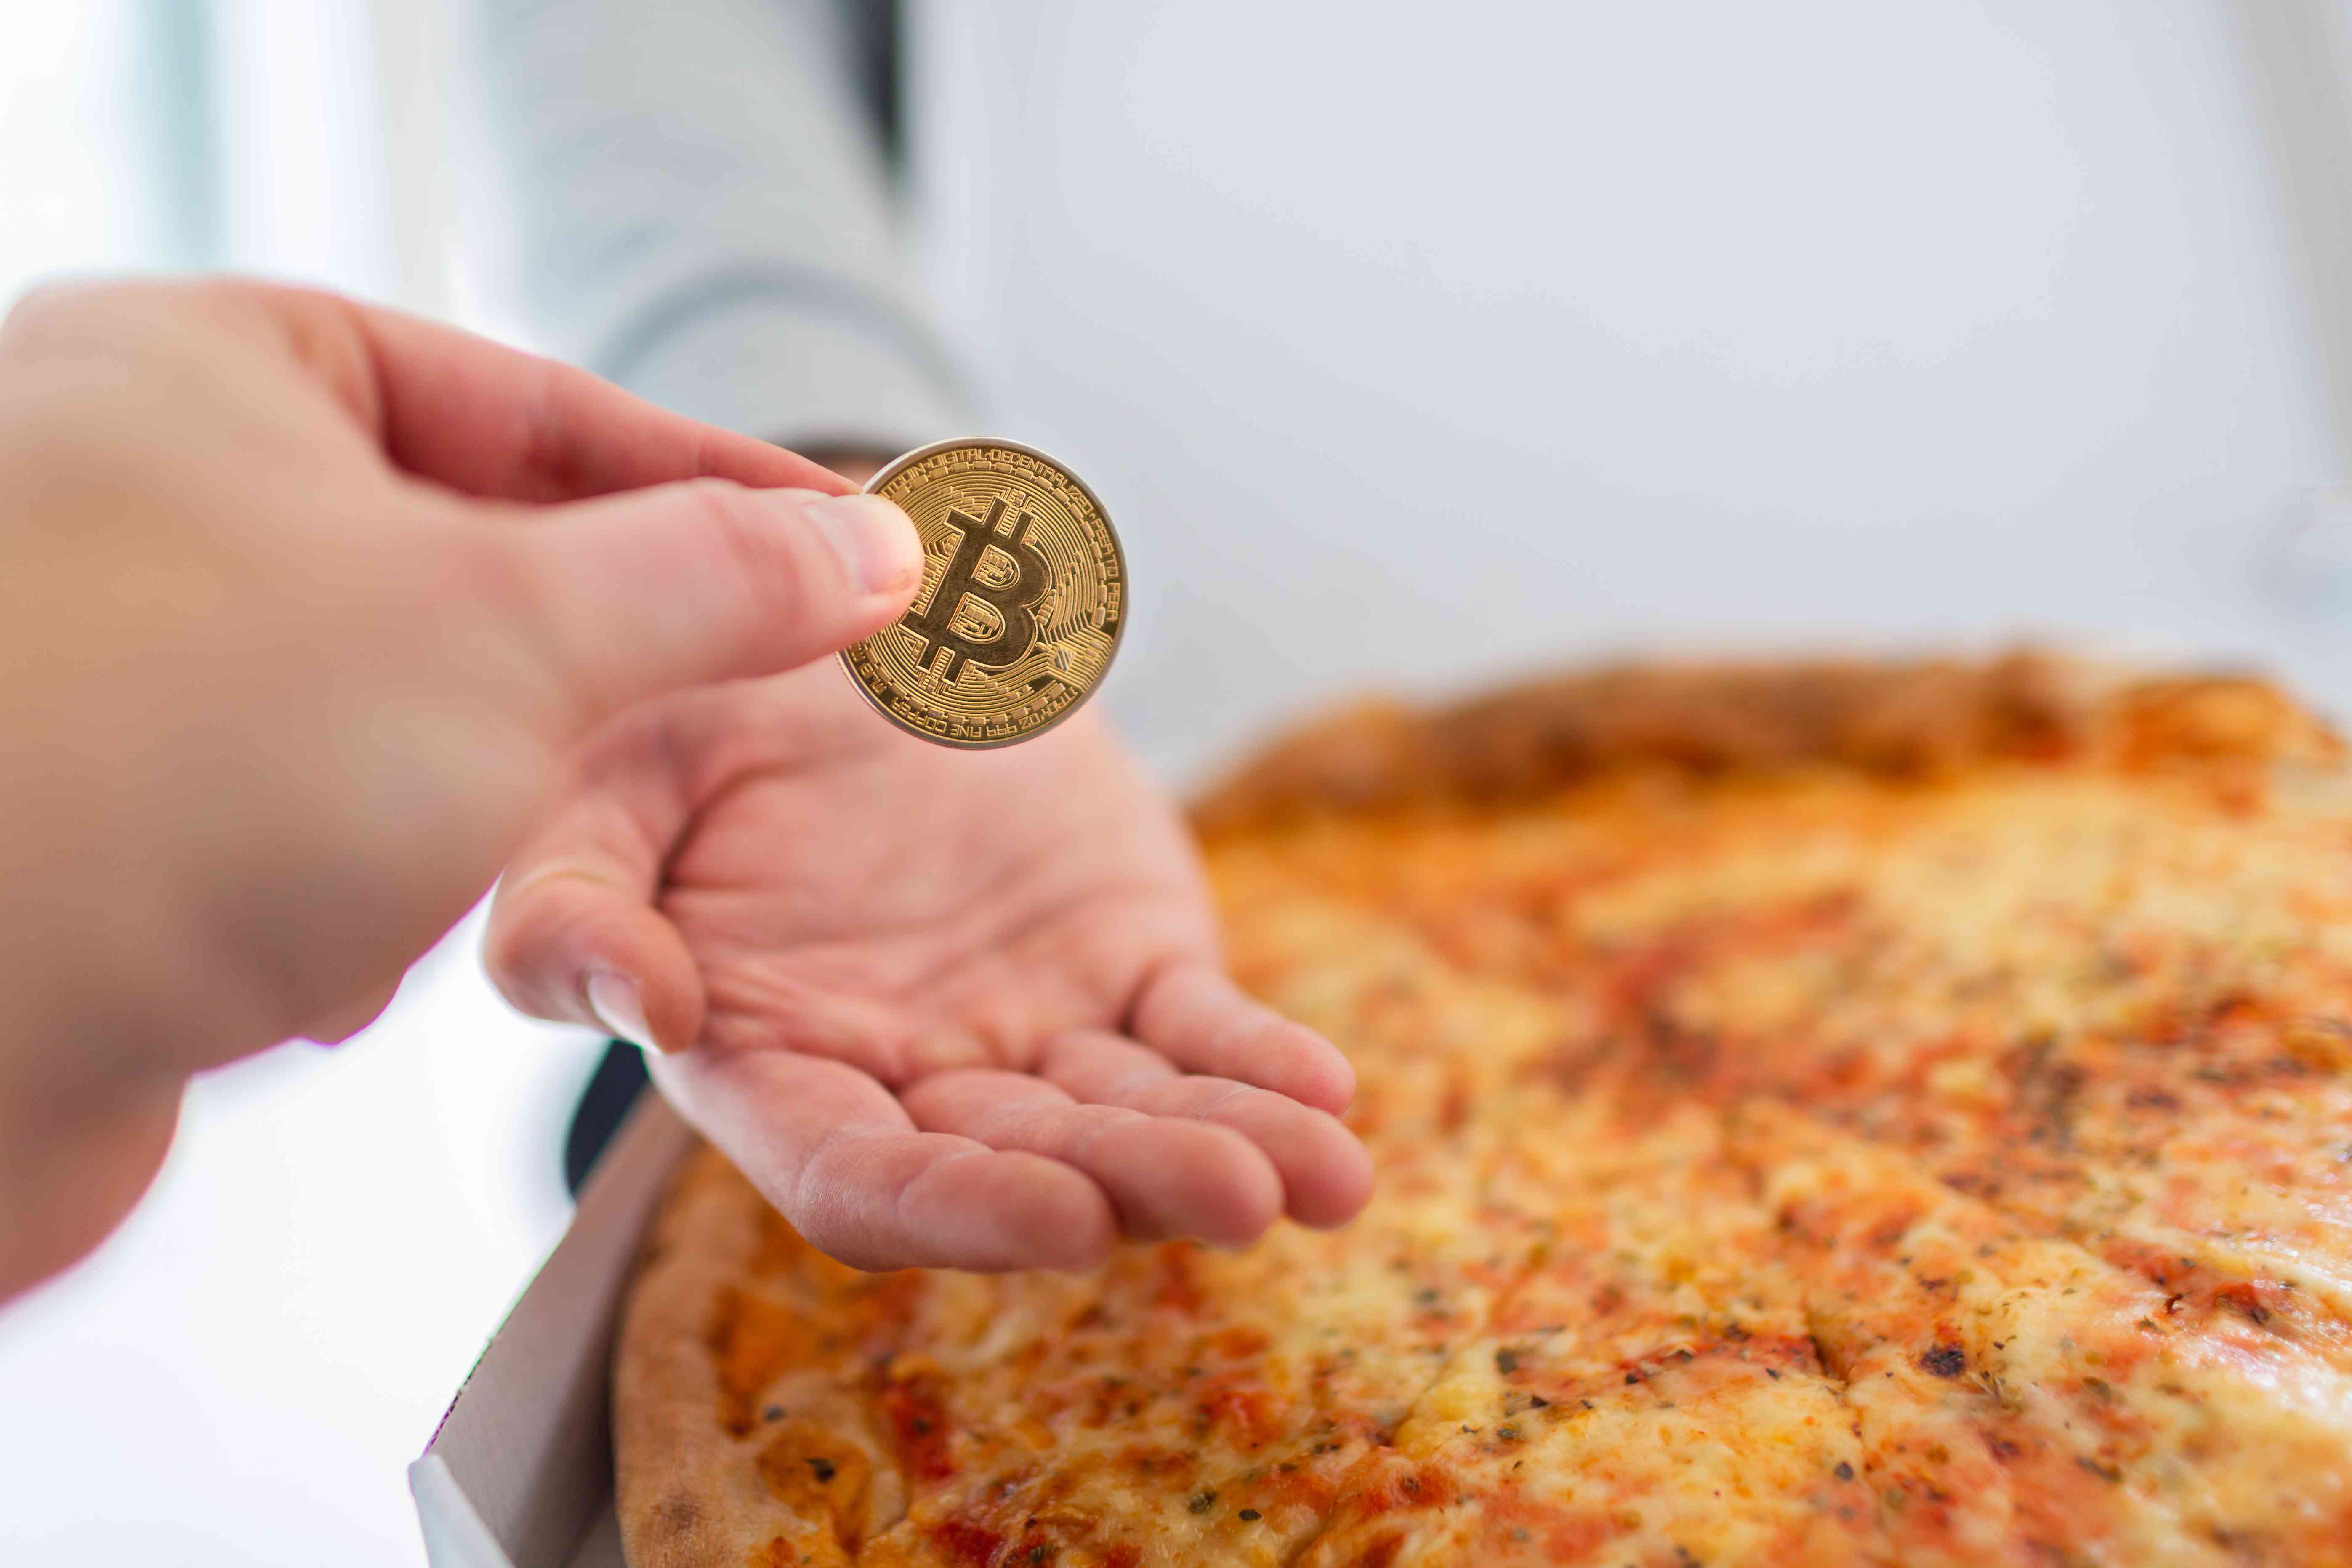 Handing over a bitcoin for a pizza